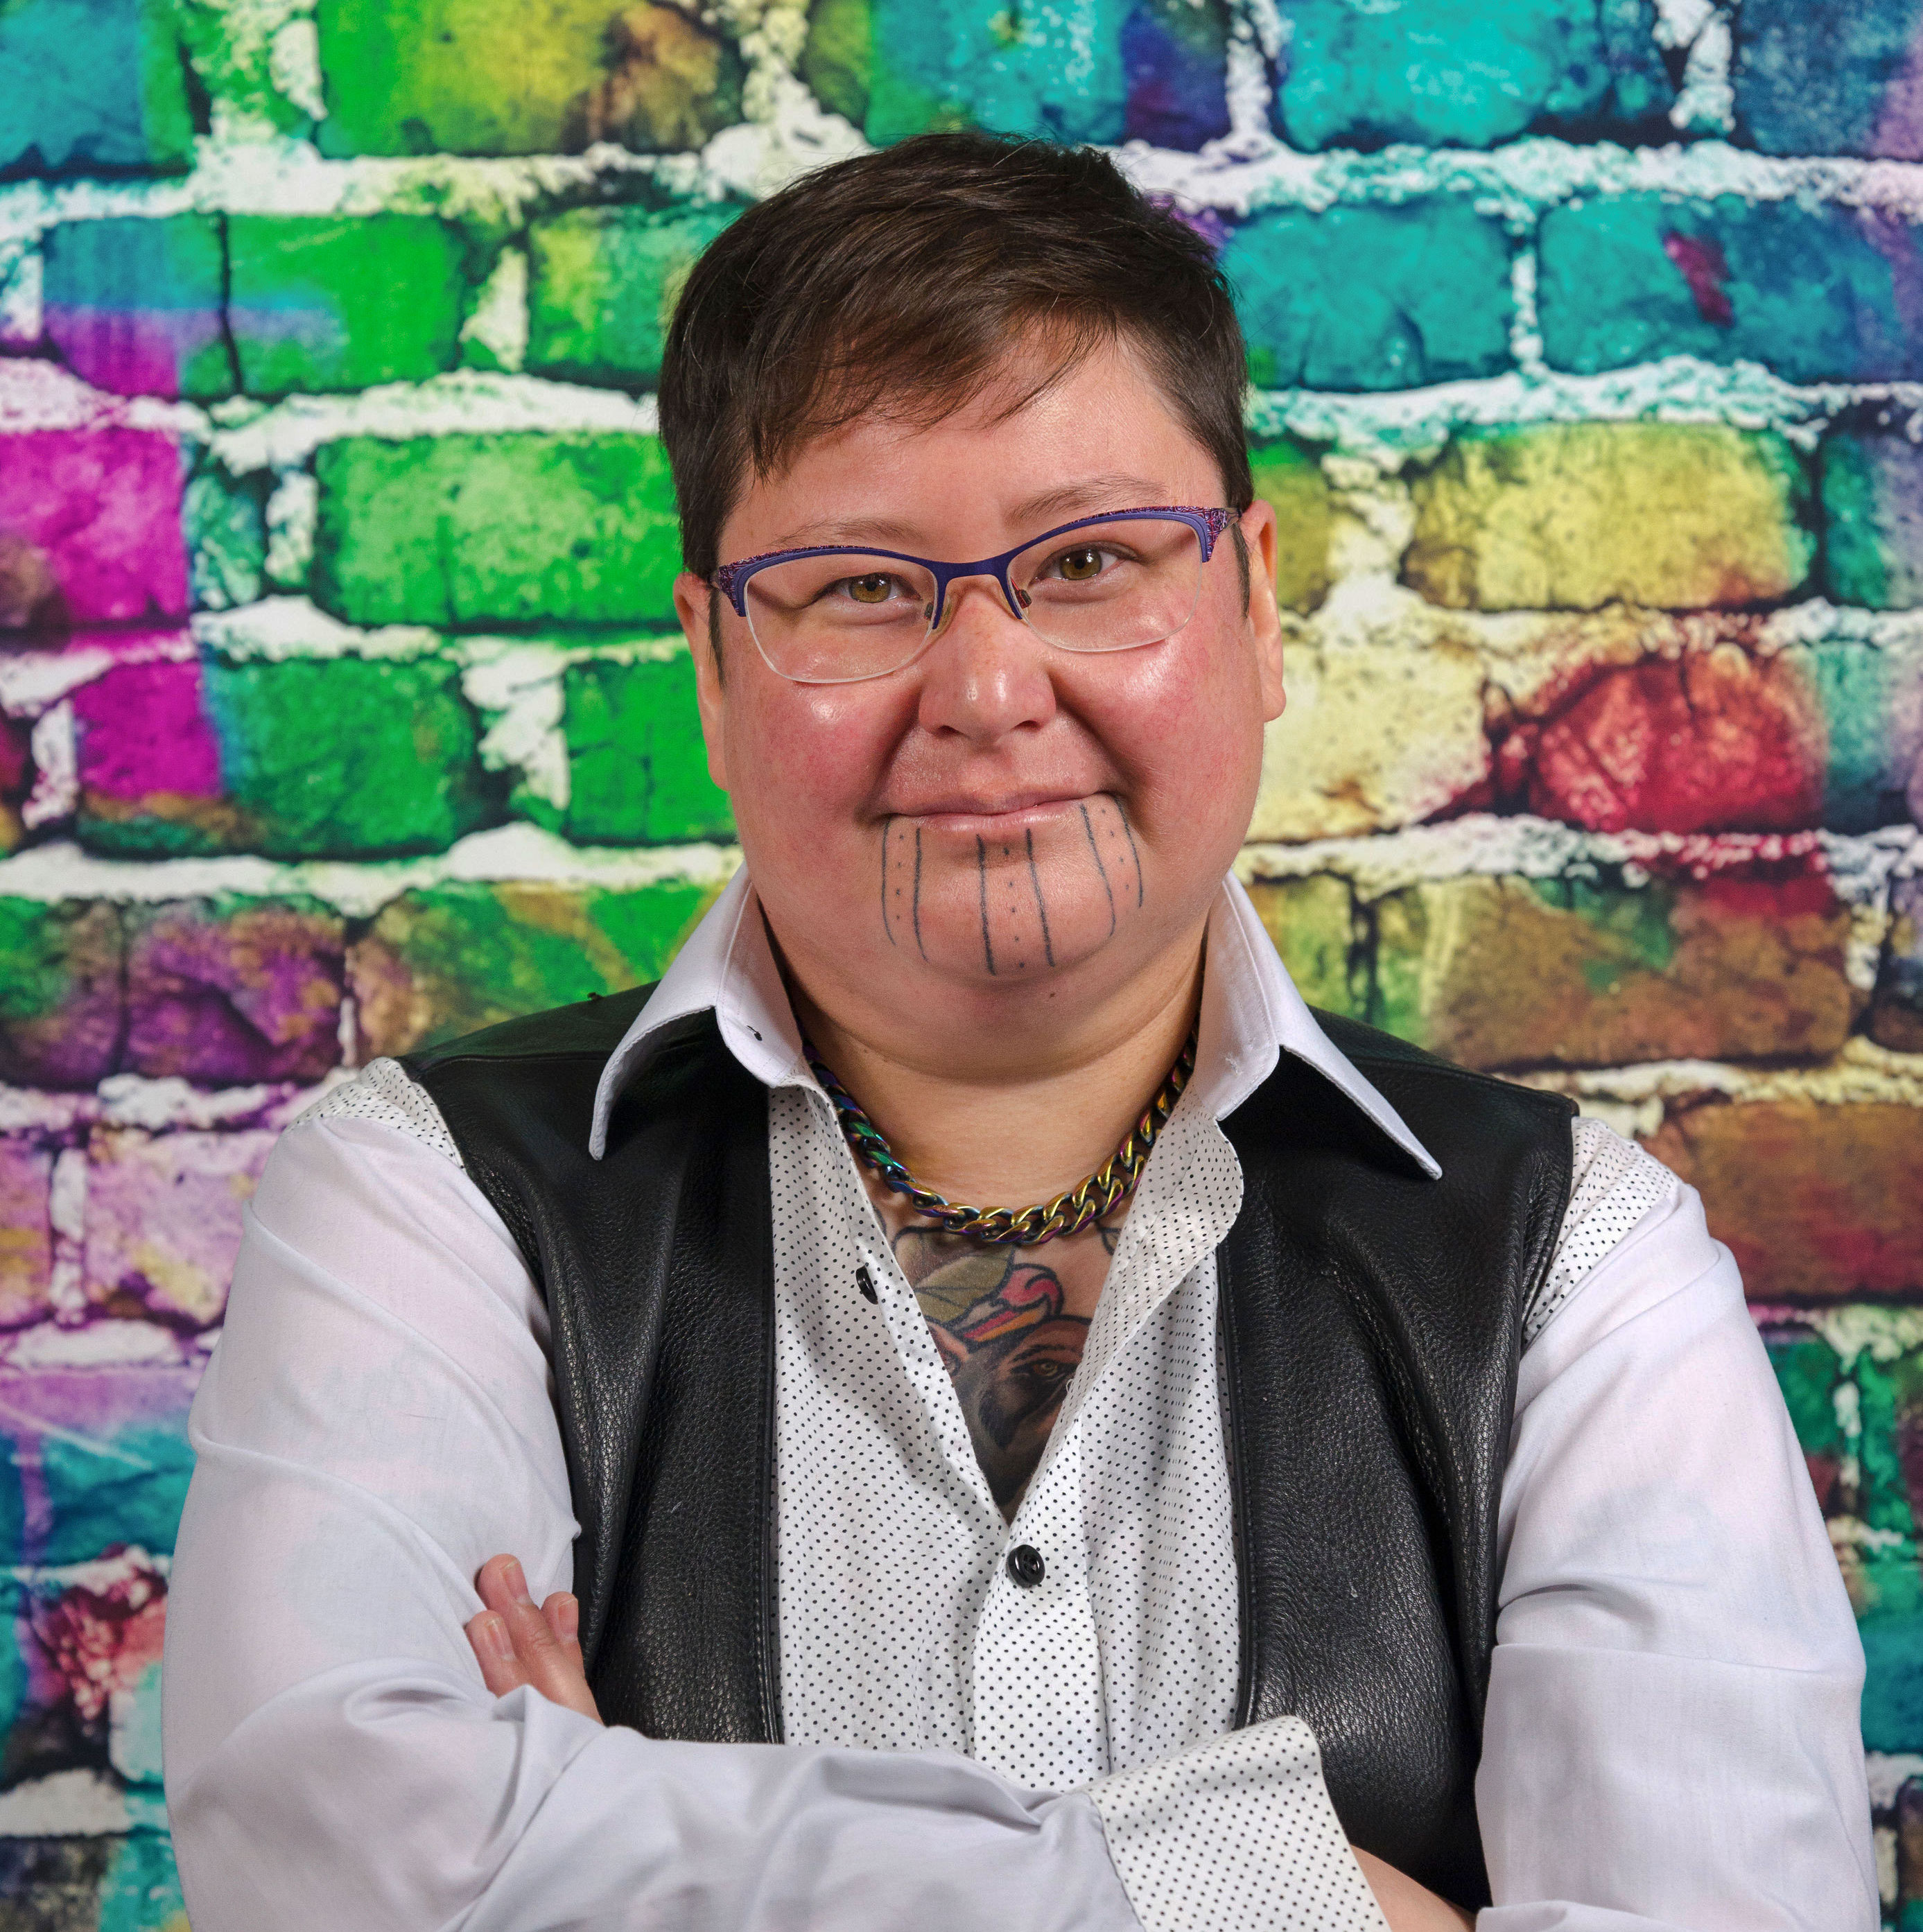 Thirza stands in front of a rainbow brick wall. She is wearing a light button-down shirt and a leather vest. They have short hair, glasses, and chin tattoos.